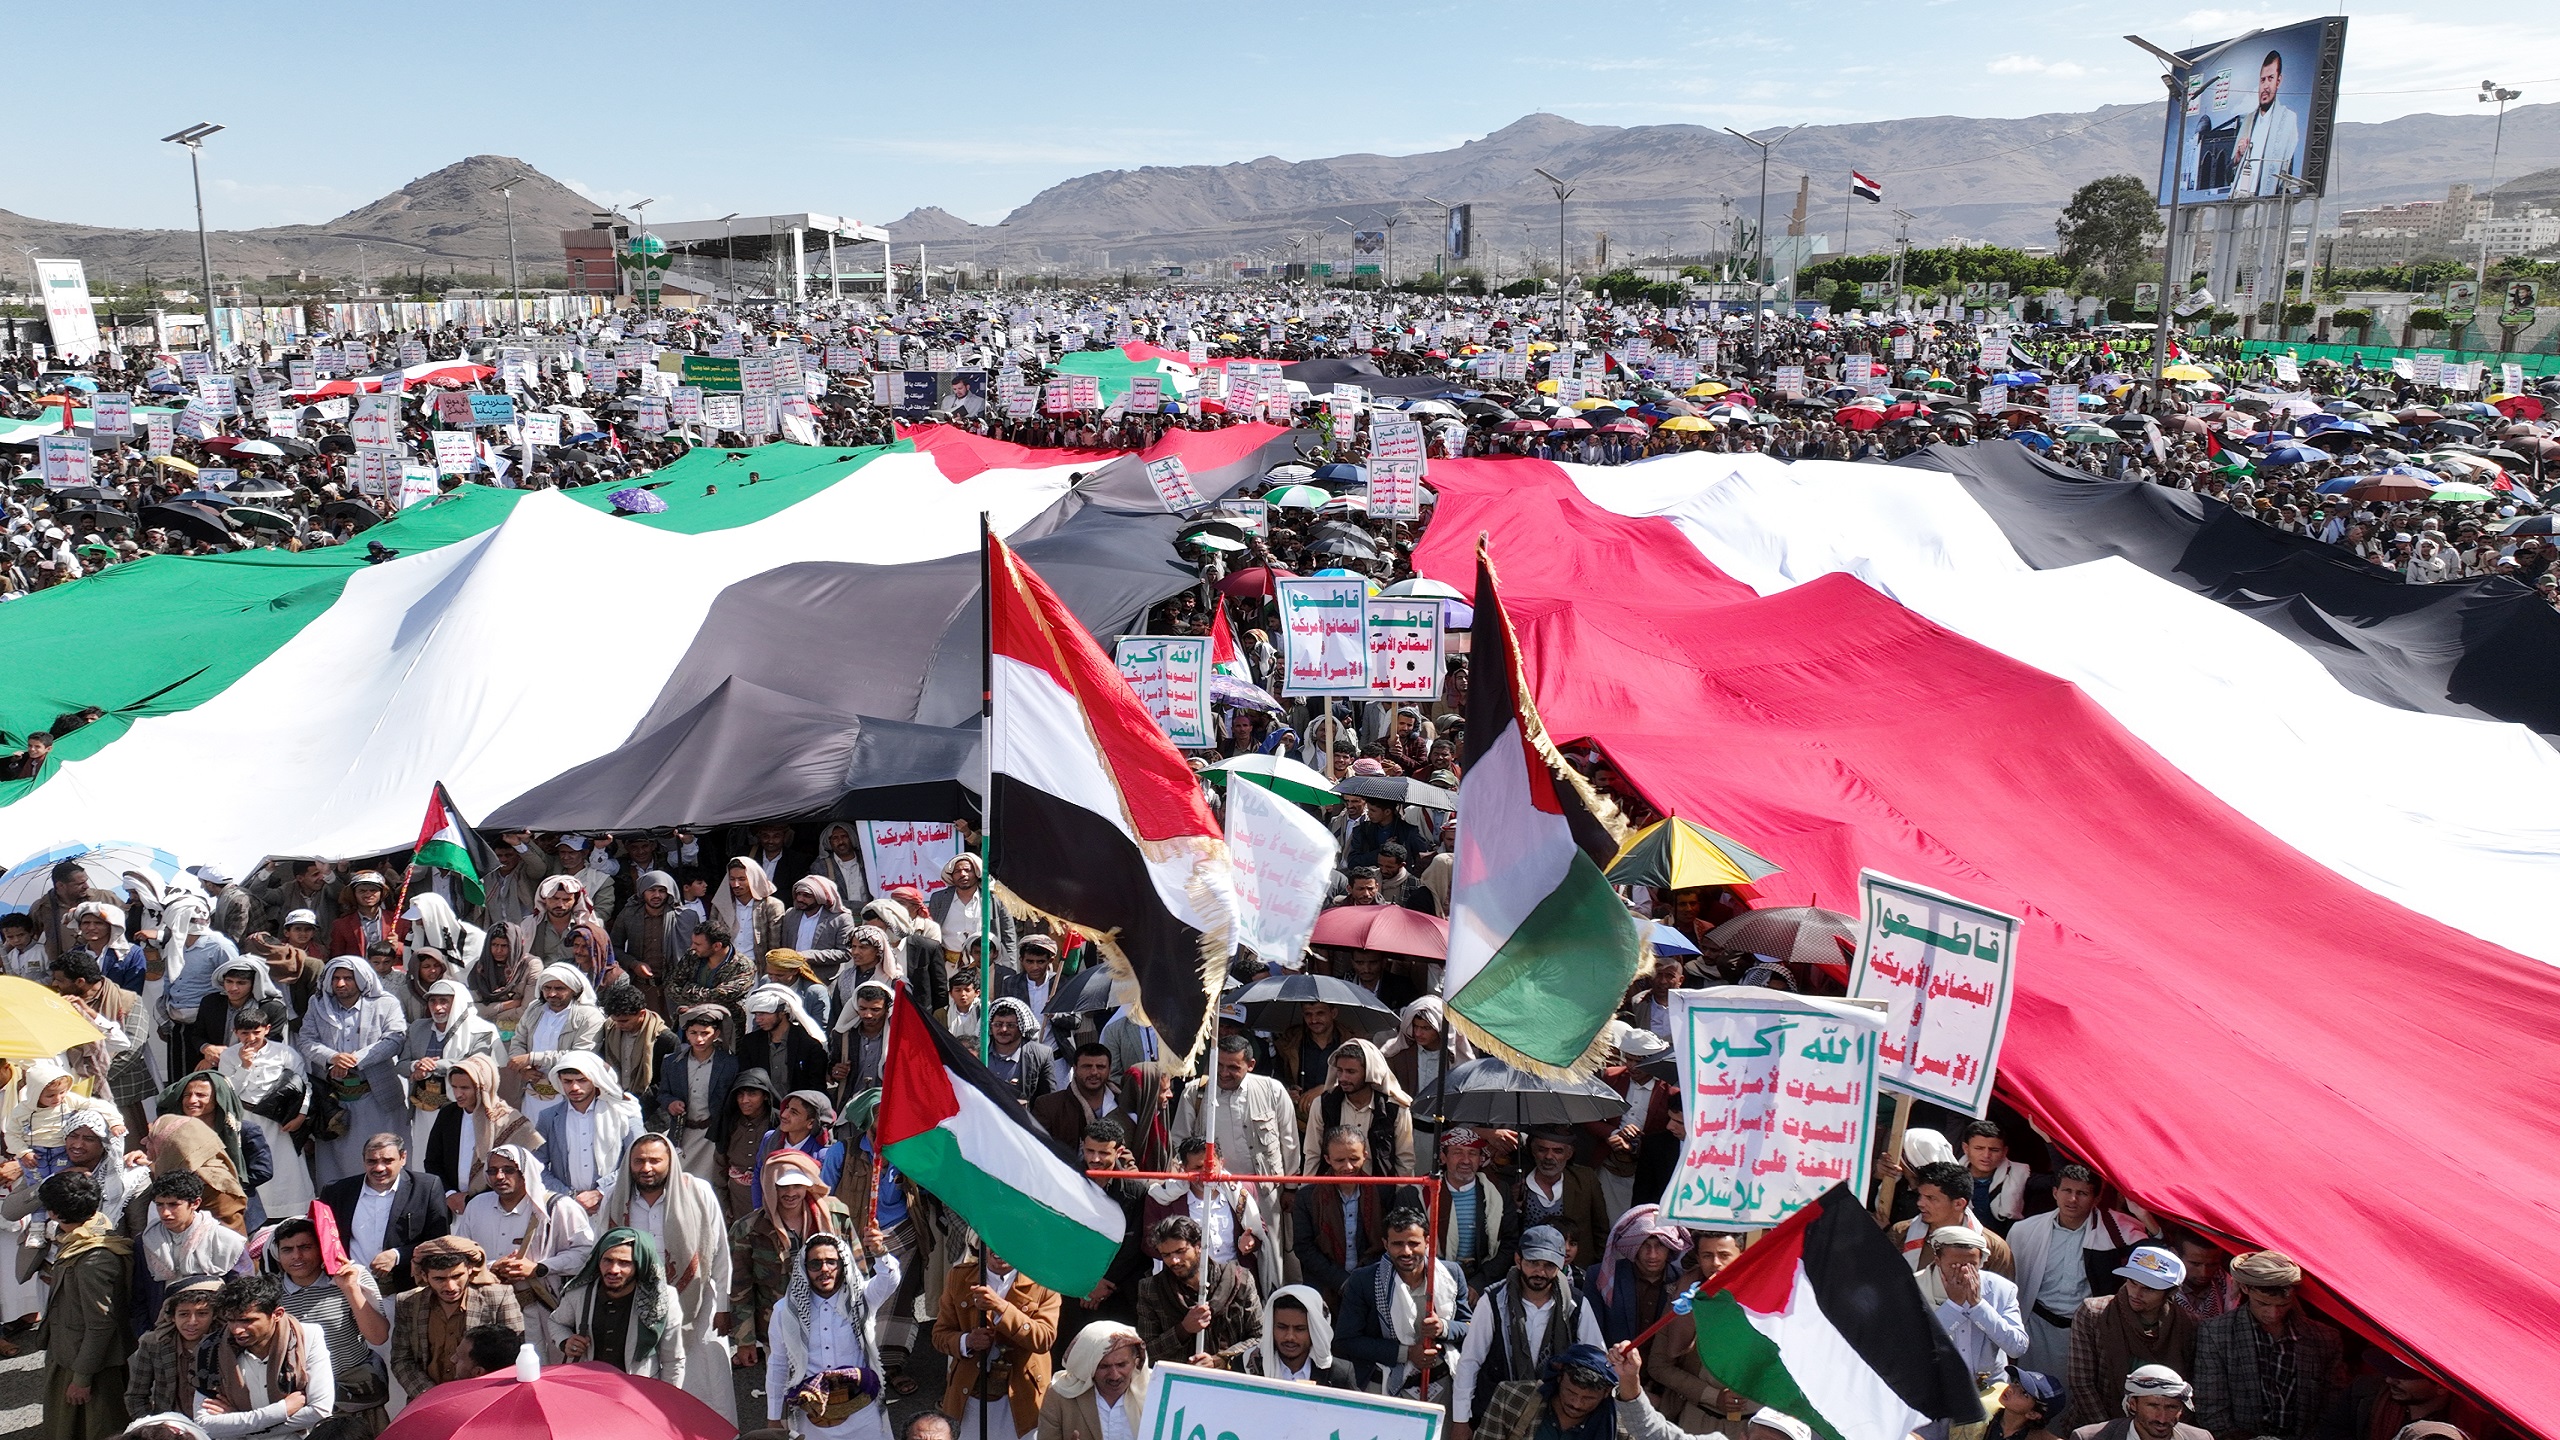 Houthis Use Israeli-Palestinian Conflict as a Distraction From Yemen’s Economic Plight